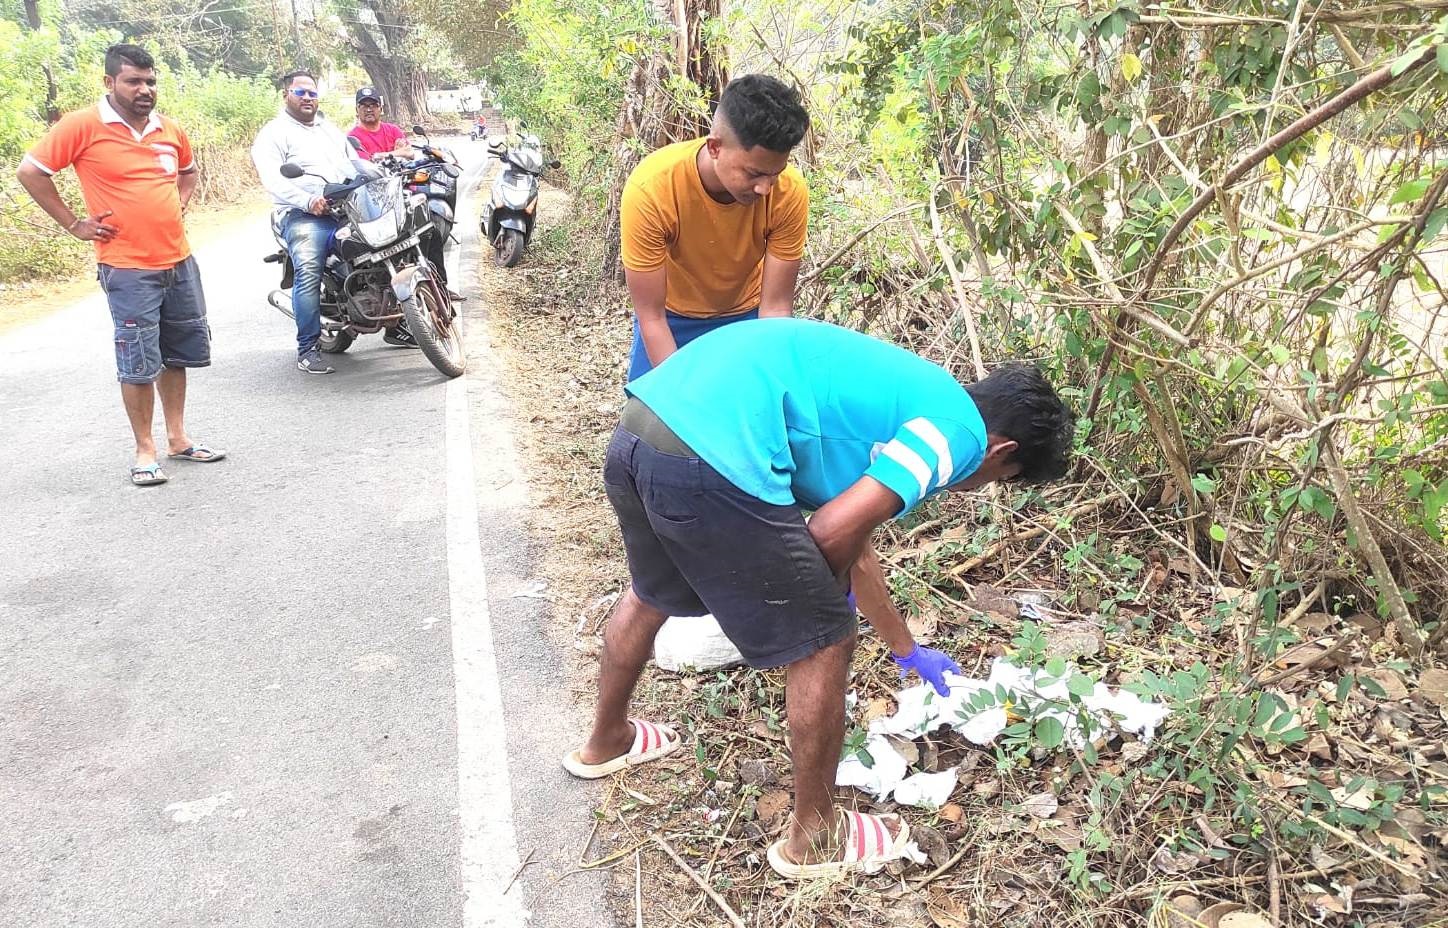 Benaulim youth catch duo red-handed dumping chicken waste along roadside